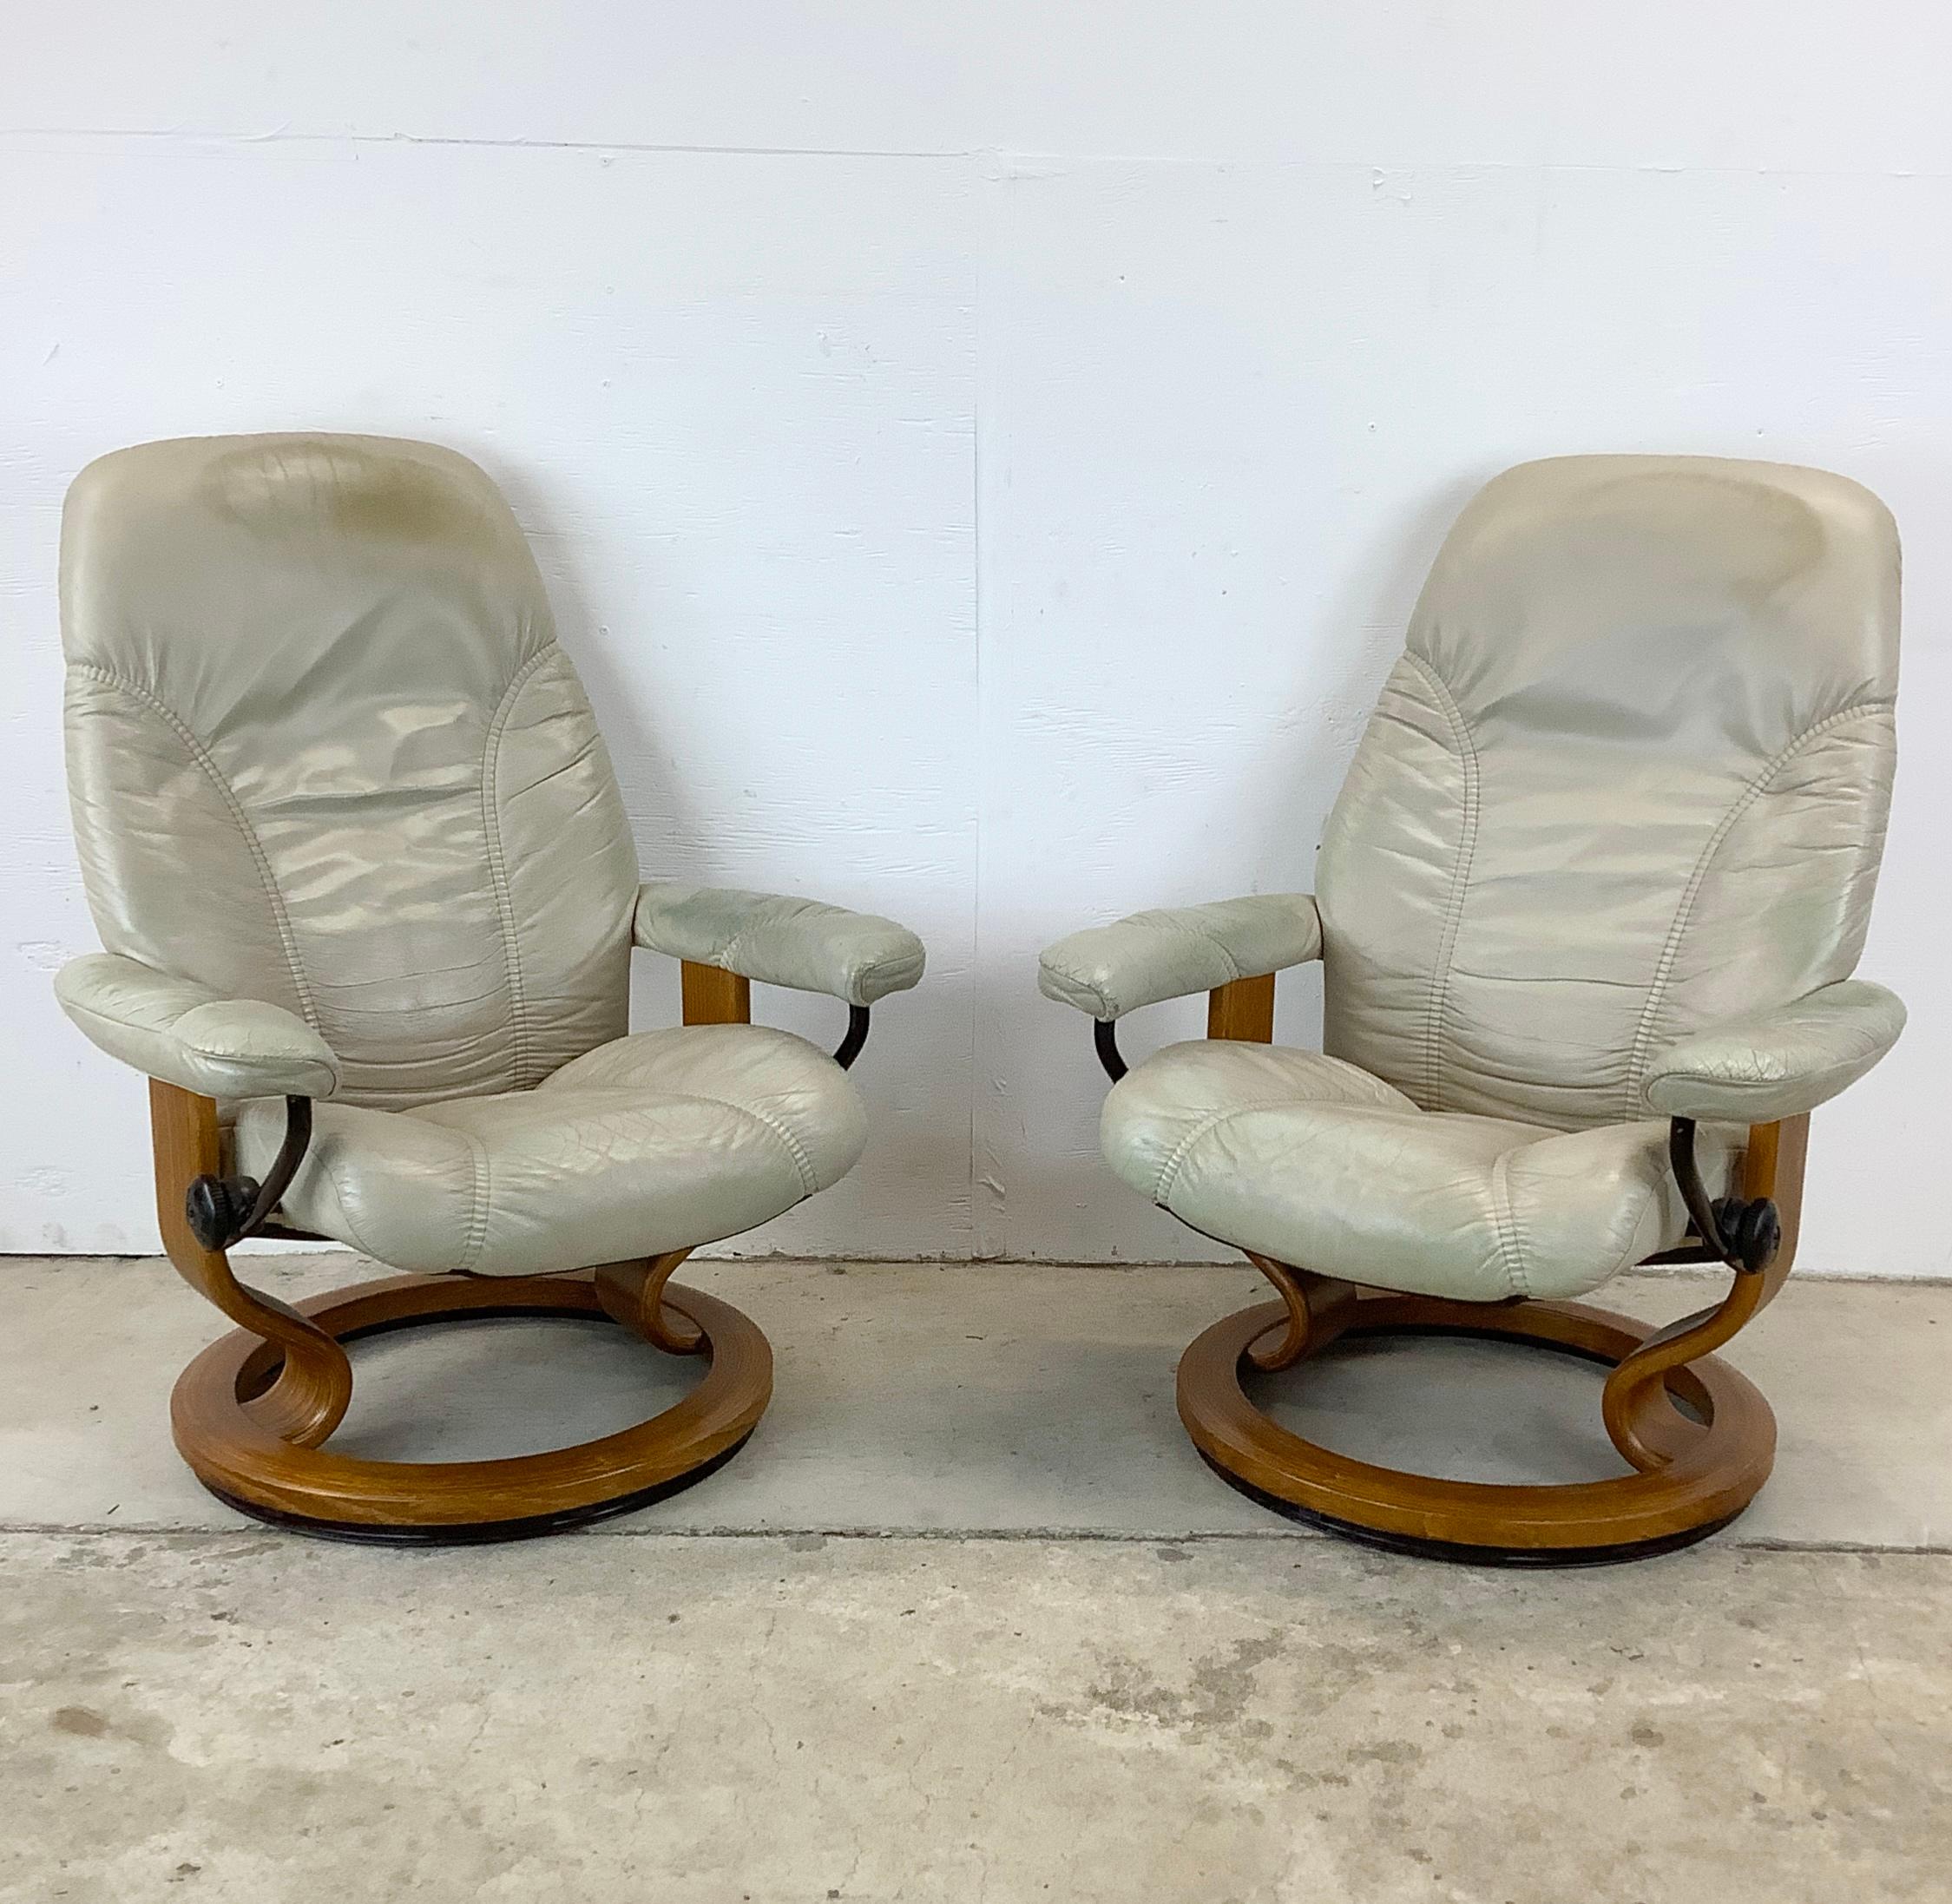 Step into a world of unrivaled comfort with this pair of Ekornes Stressless Reclining Lounge Chairs, paired with matching ottomans, where Norwegian craftsmanship meets the functional elegance of mid-century design. These sets, with their off-white